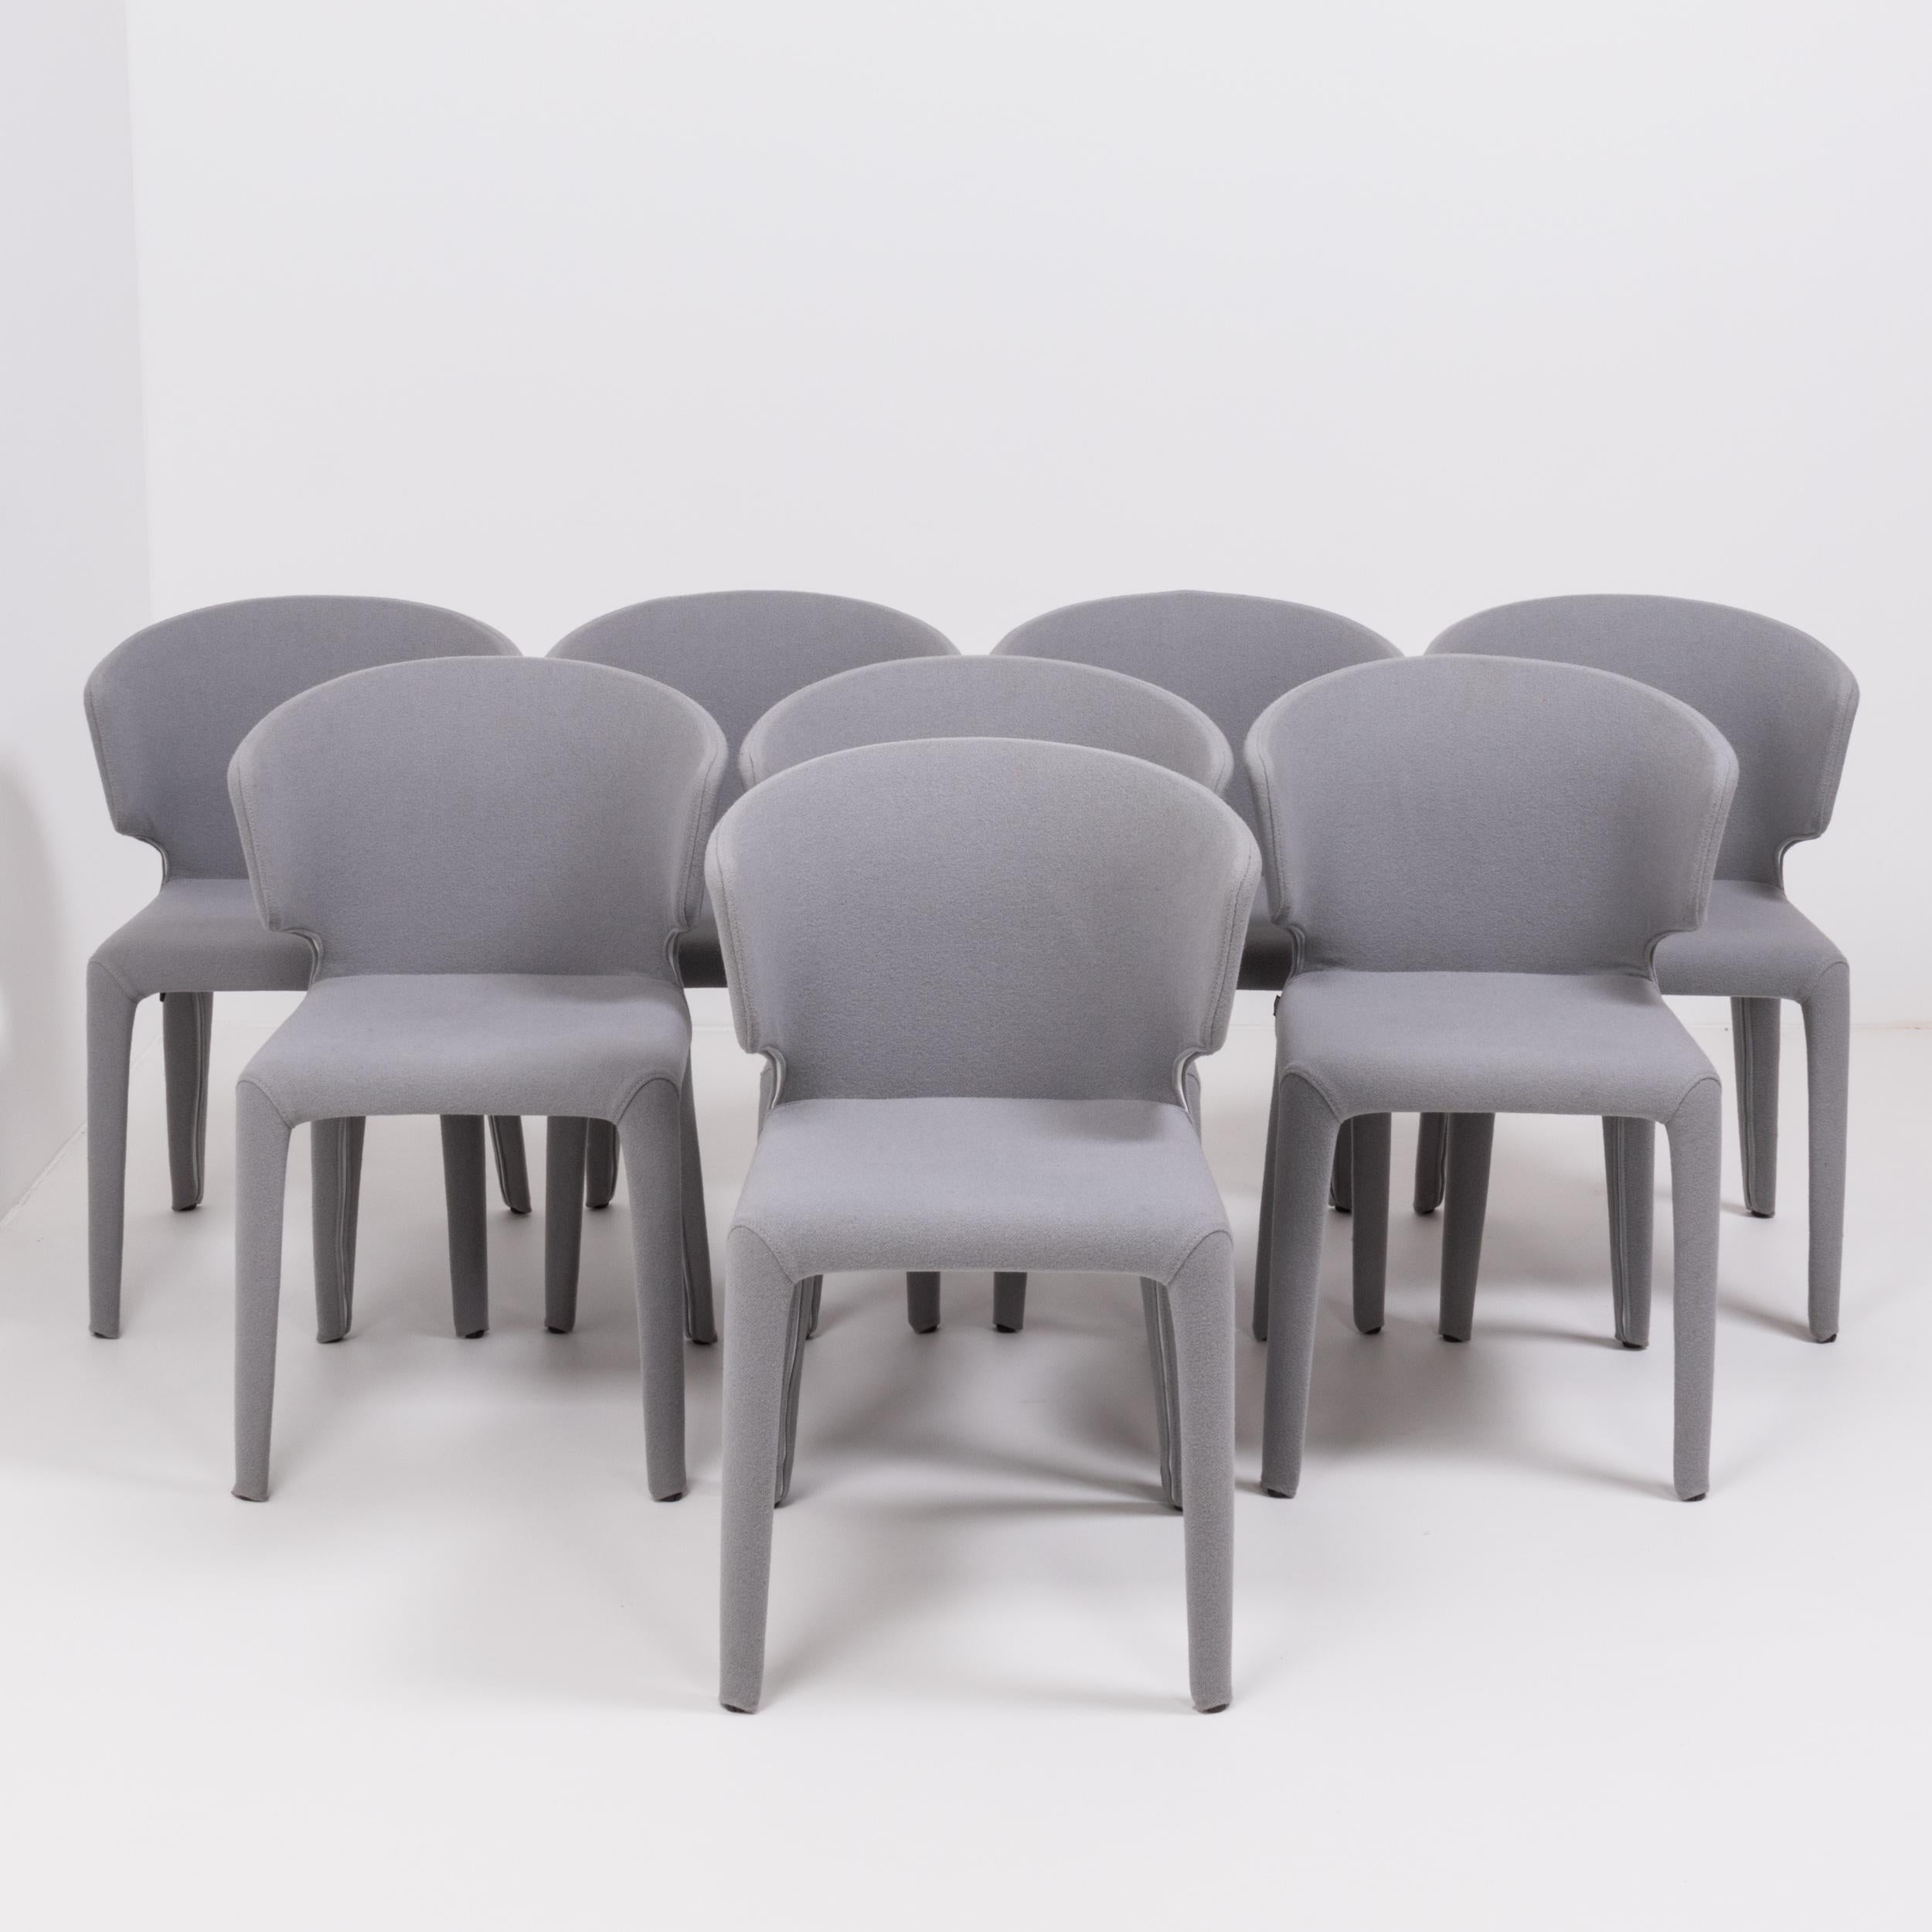 Italian Cassina by Hannes Wettstein 367 Hola Grey Fabric Dining Chairs, Set of 8